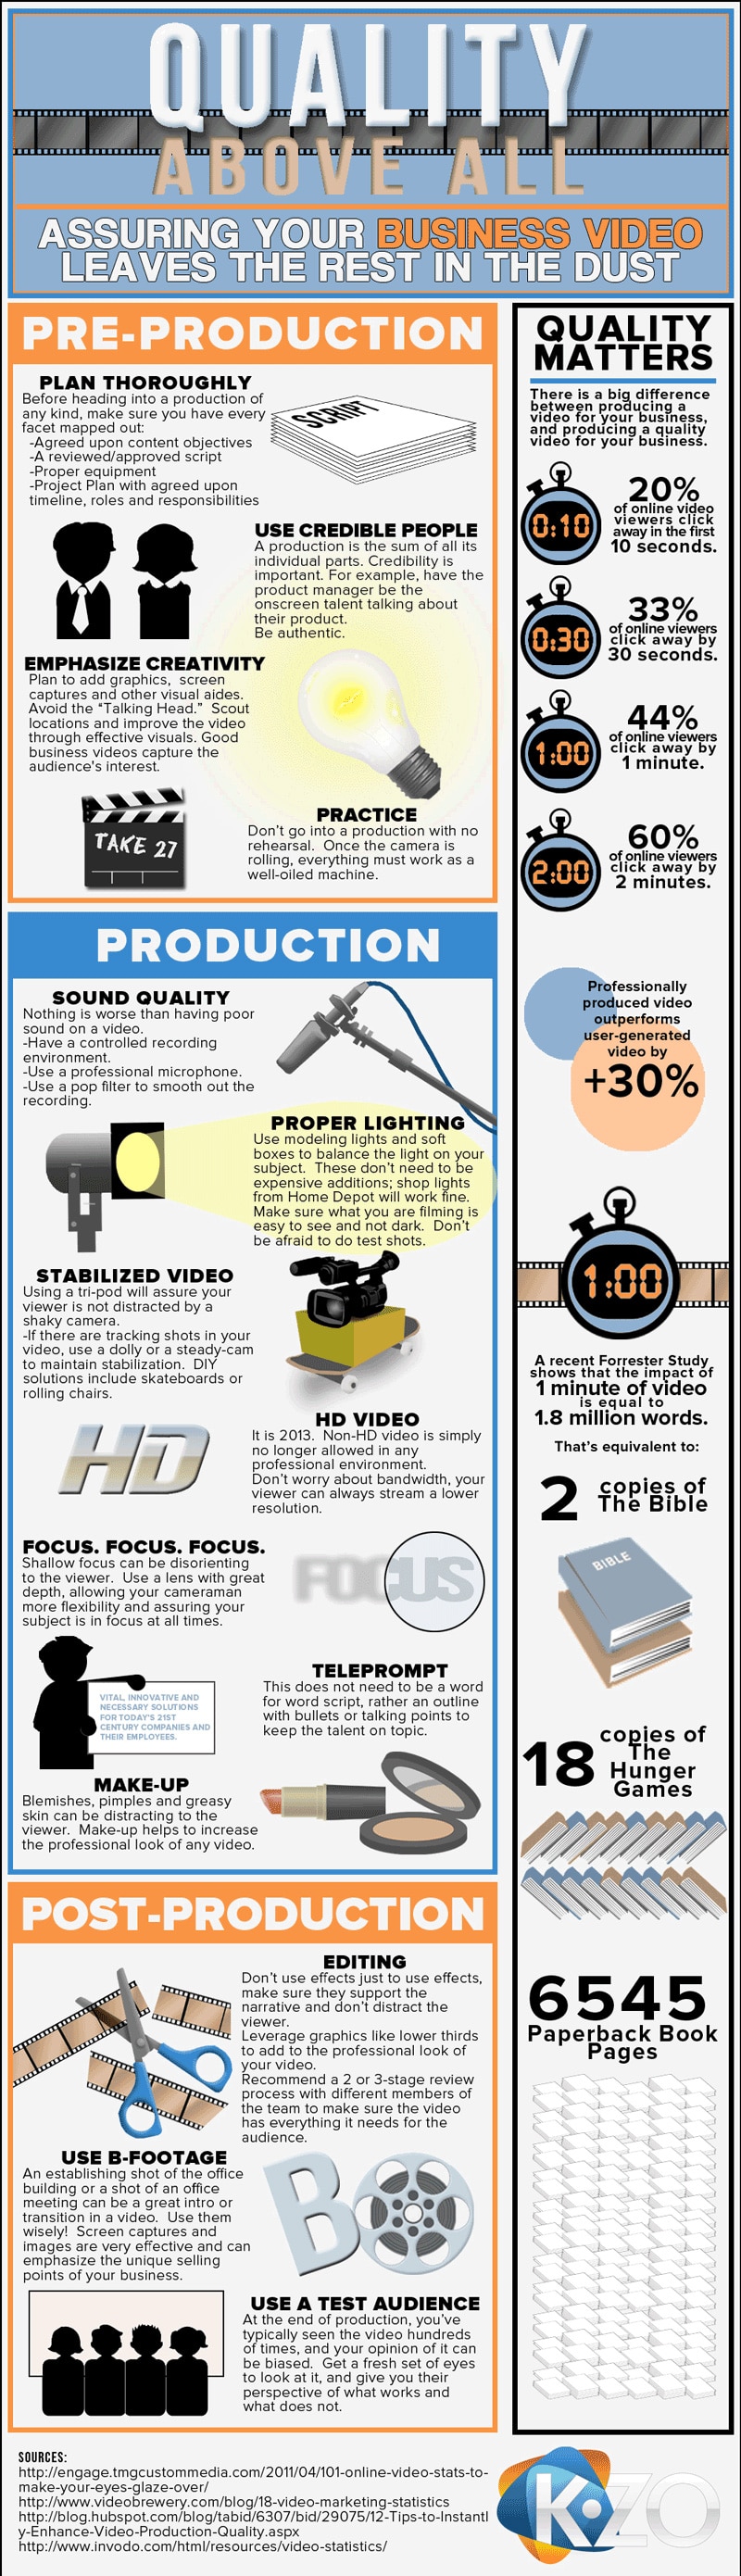 How To: Create A Successful Business Marketing Video [Infographic]